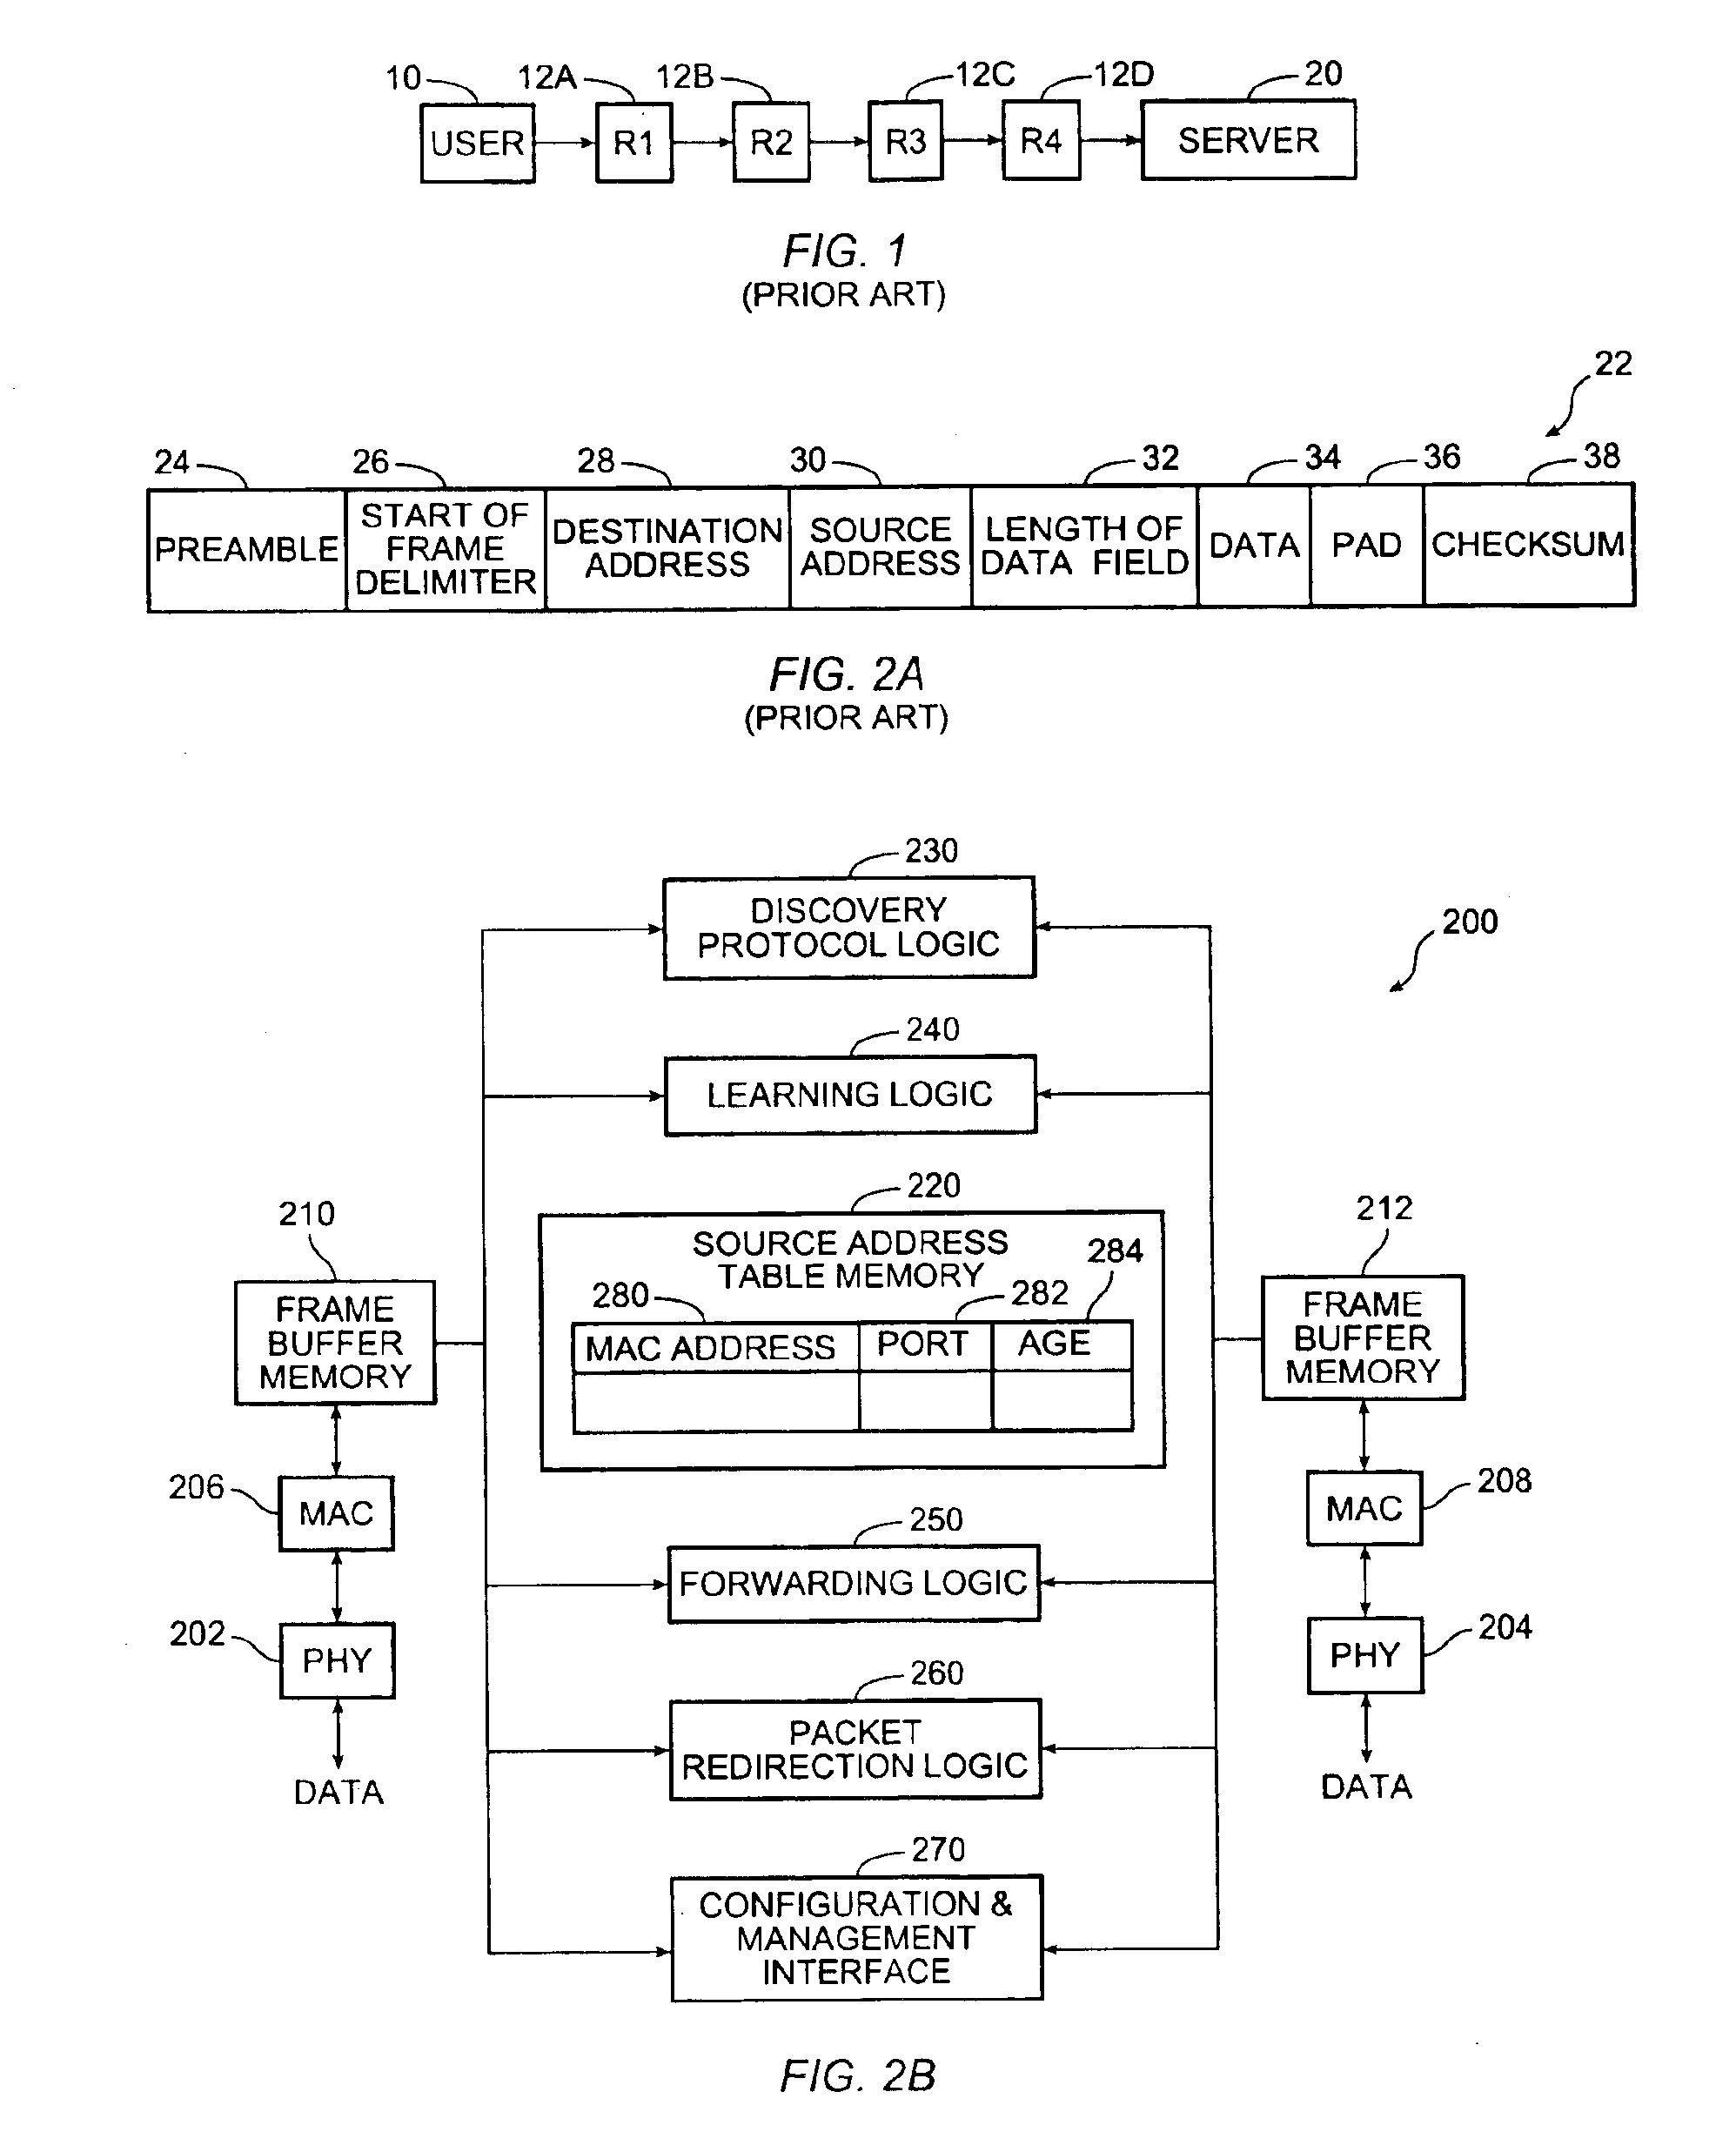 HTTP redirection of configuration data for network devices